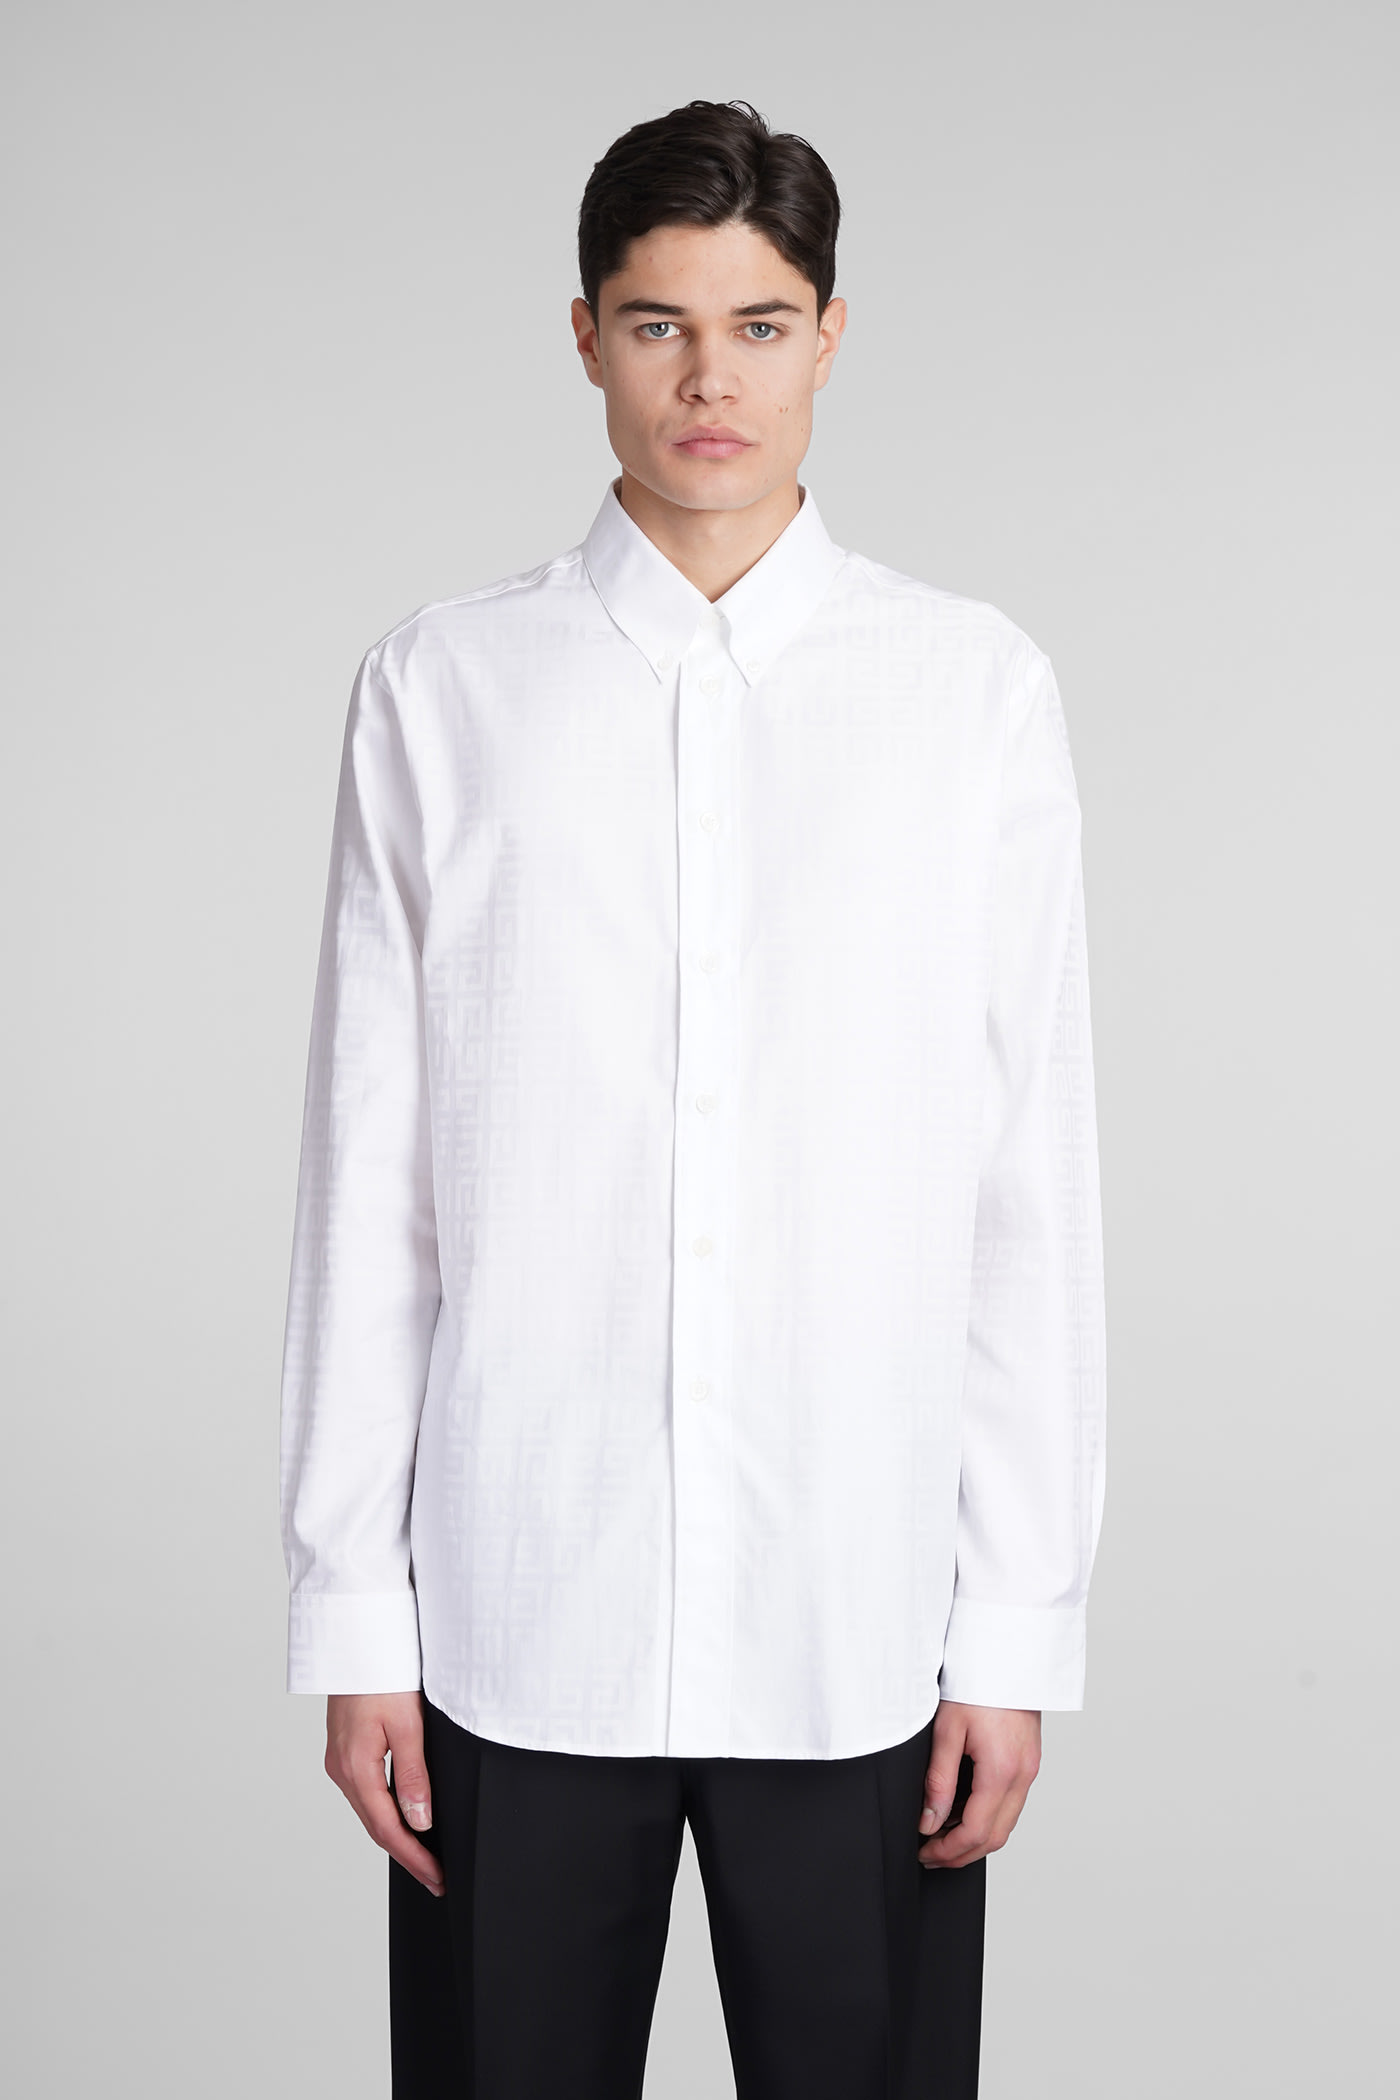 GIVENCHY SHIRT IN WHITE COTTON